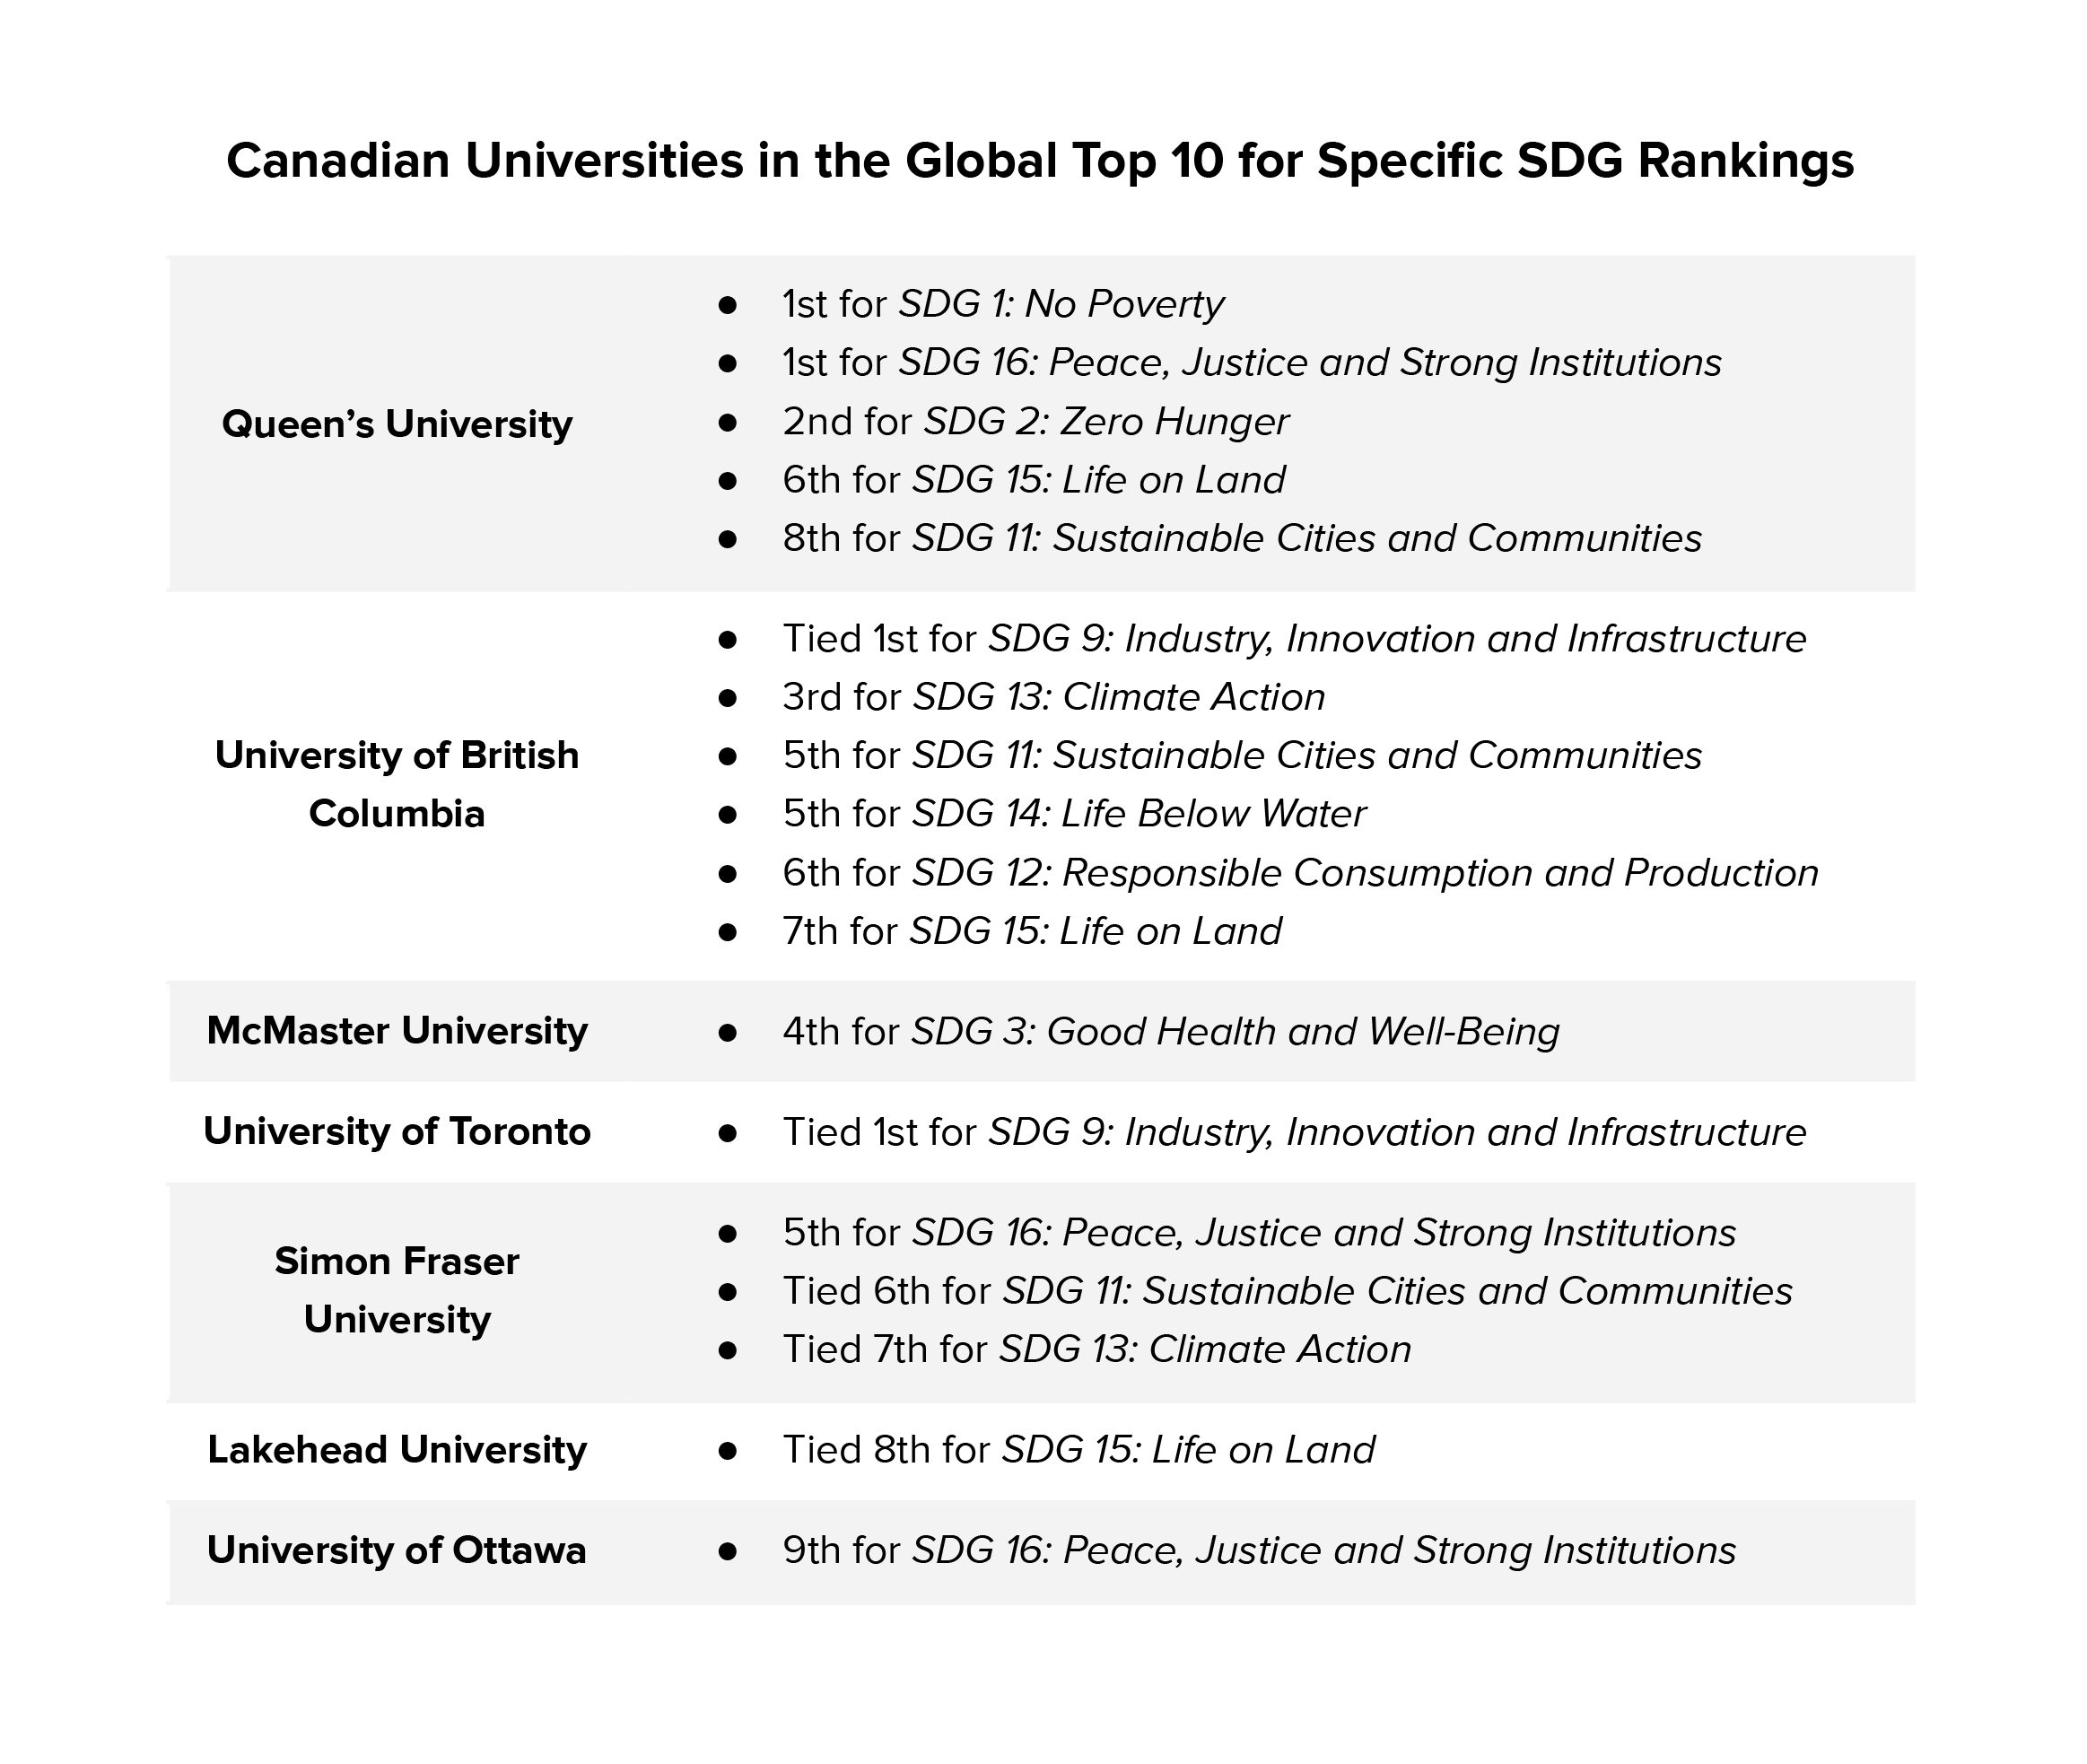 Canadian Universities' Top 10 Rankings in the Times Higher Education Impact Rankings for 2021 for each SDG